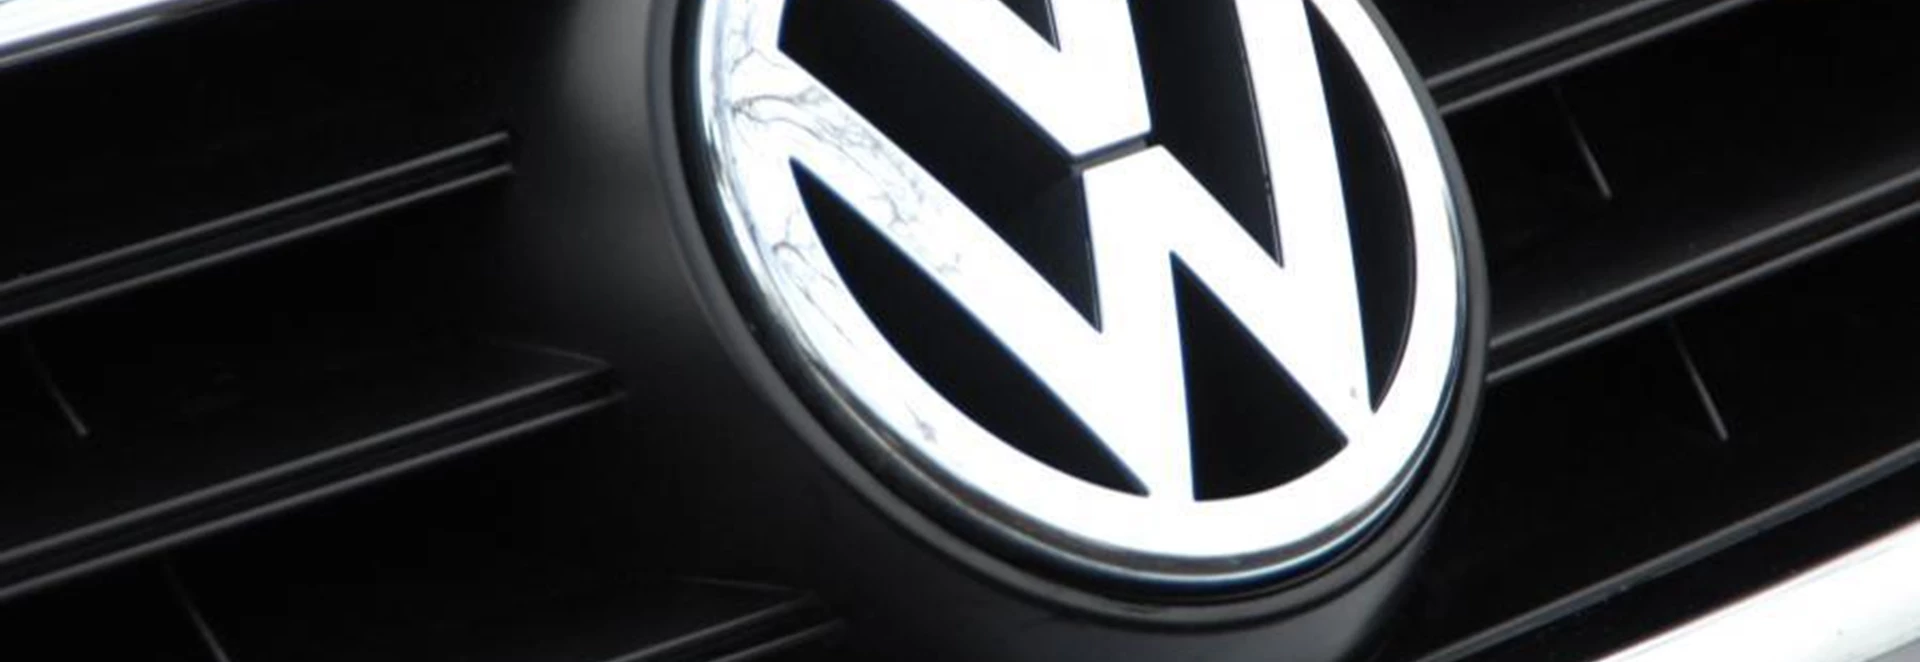 Millions of Volkswagen cars vulnerable to hacking, according to study